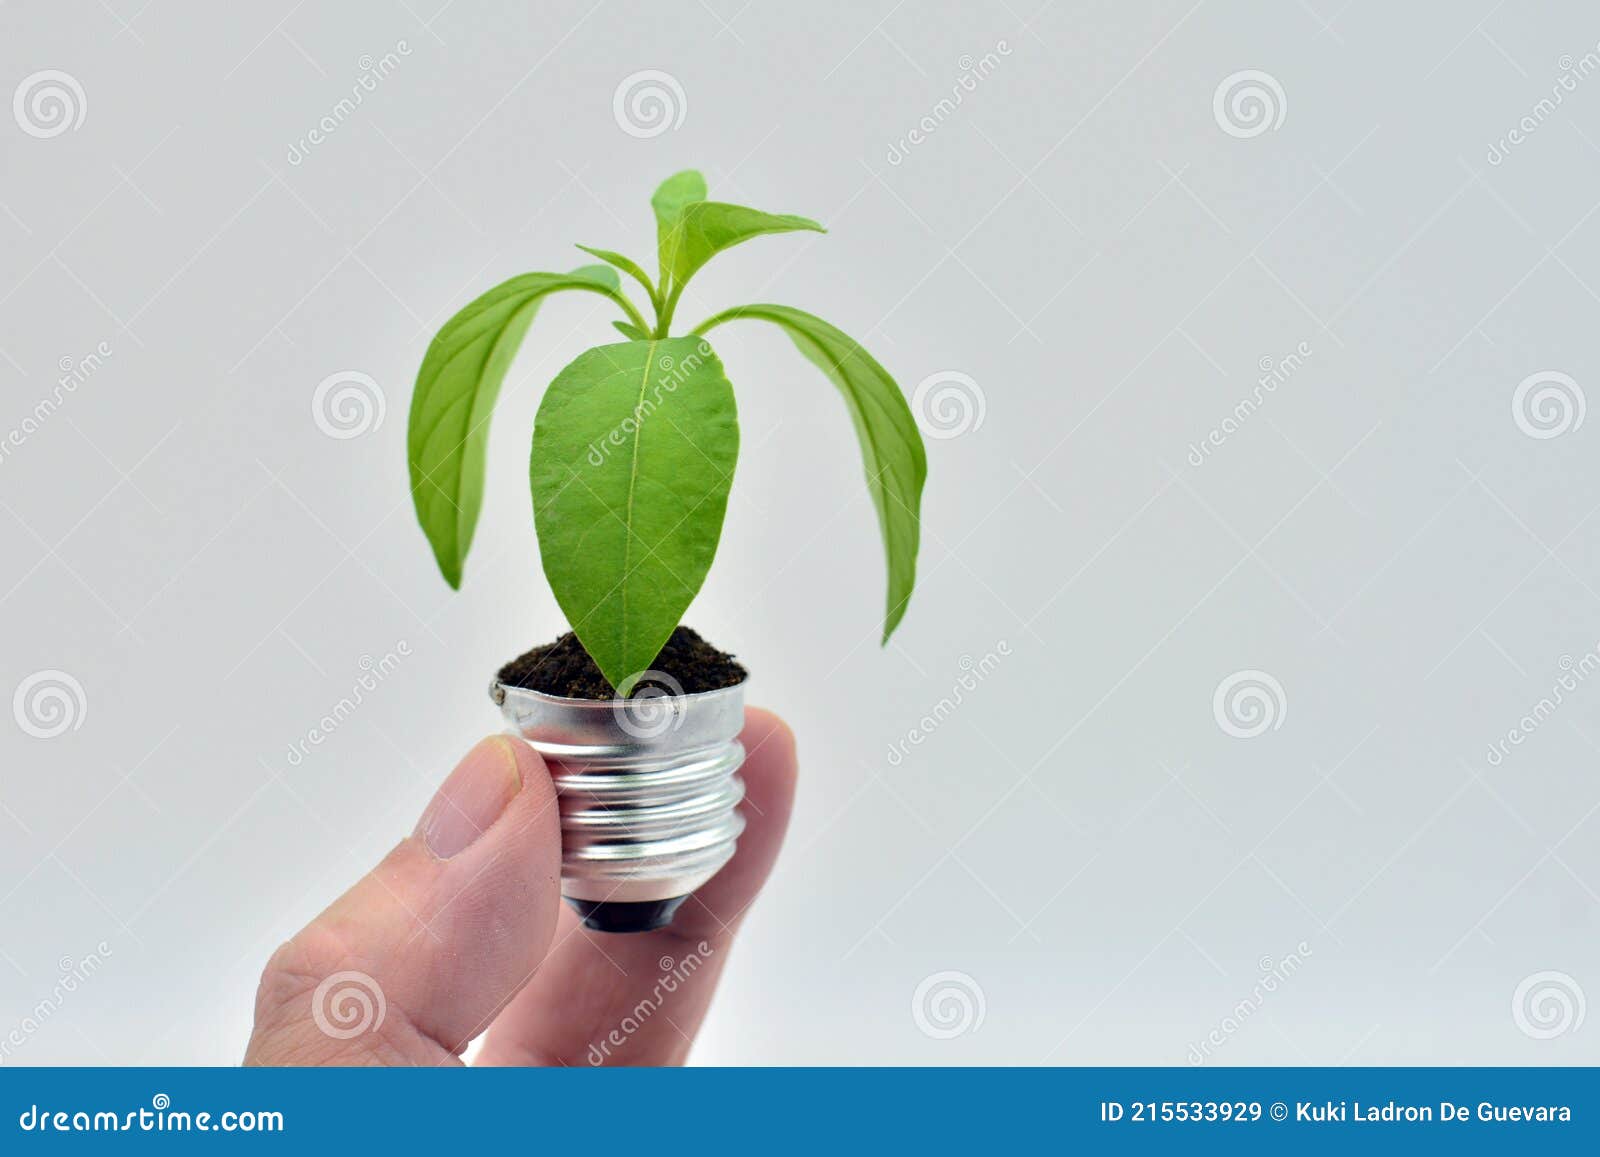 plant growing in a bulb